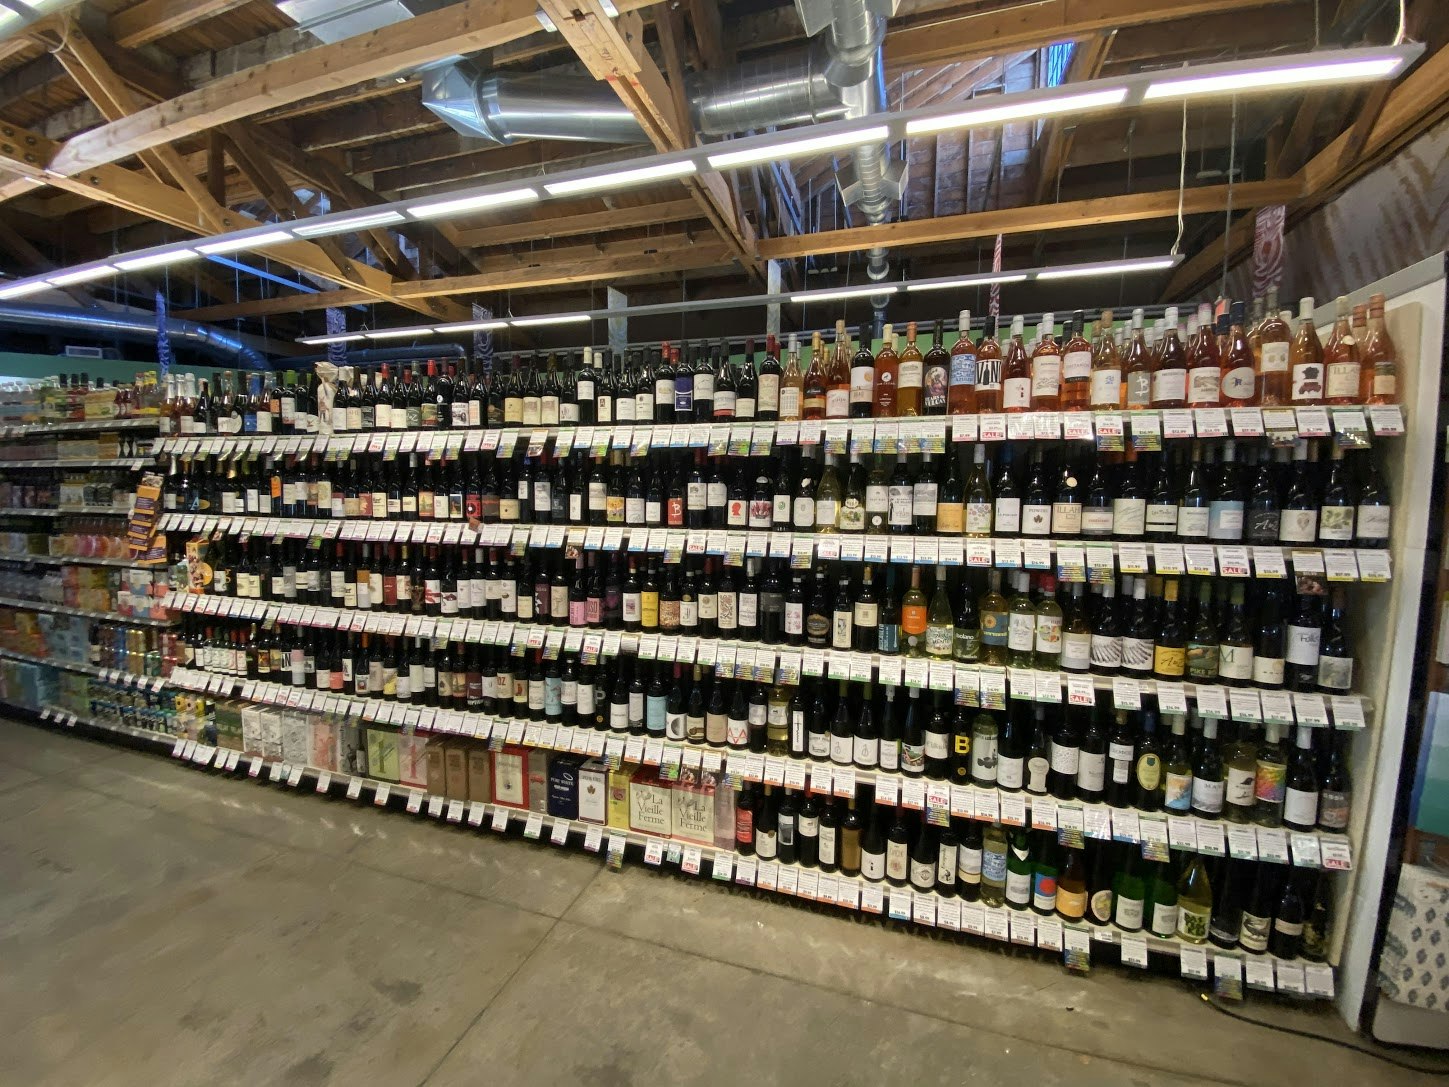 A row of wine bottles from the beverage aisle of a Green Zebra grocery store in Portland, Oregon